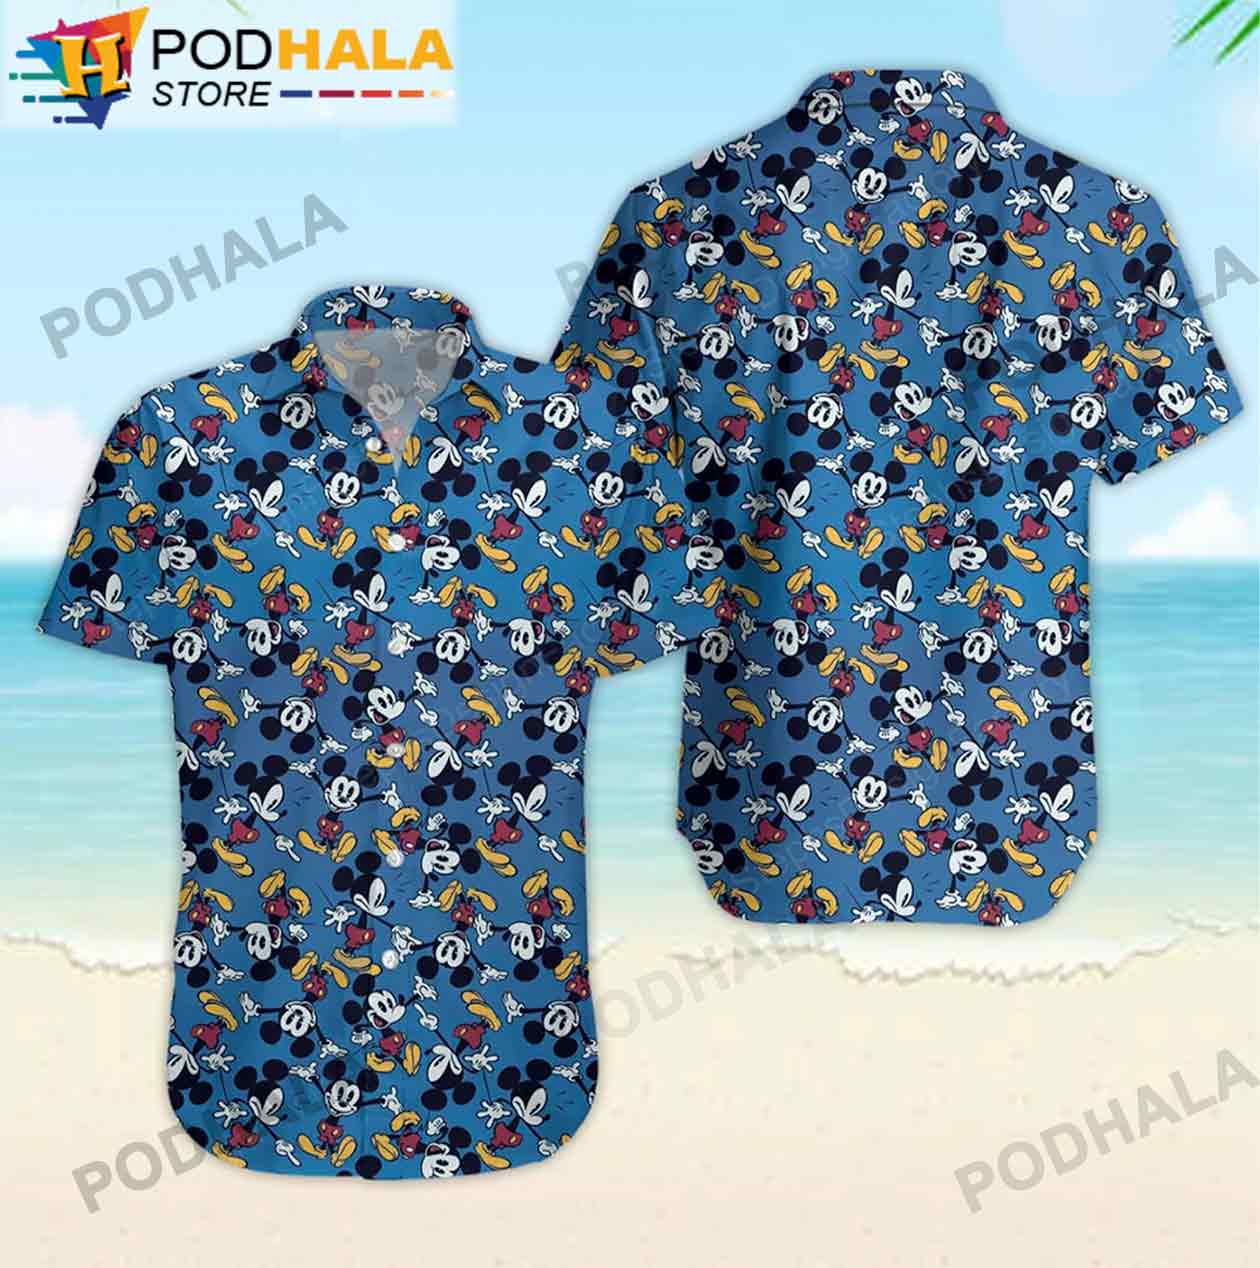 Funny Cartoon Pirates Hunting Mickey Mouse Hawaiian Shirt 3D - Bring Your  Ideas, Thoughts And Imaginations Into Reality Today